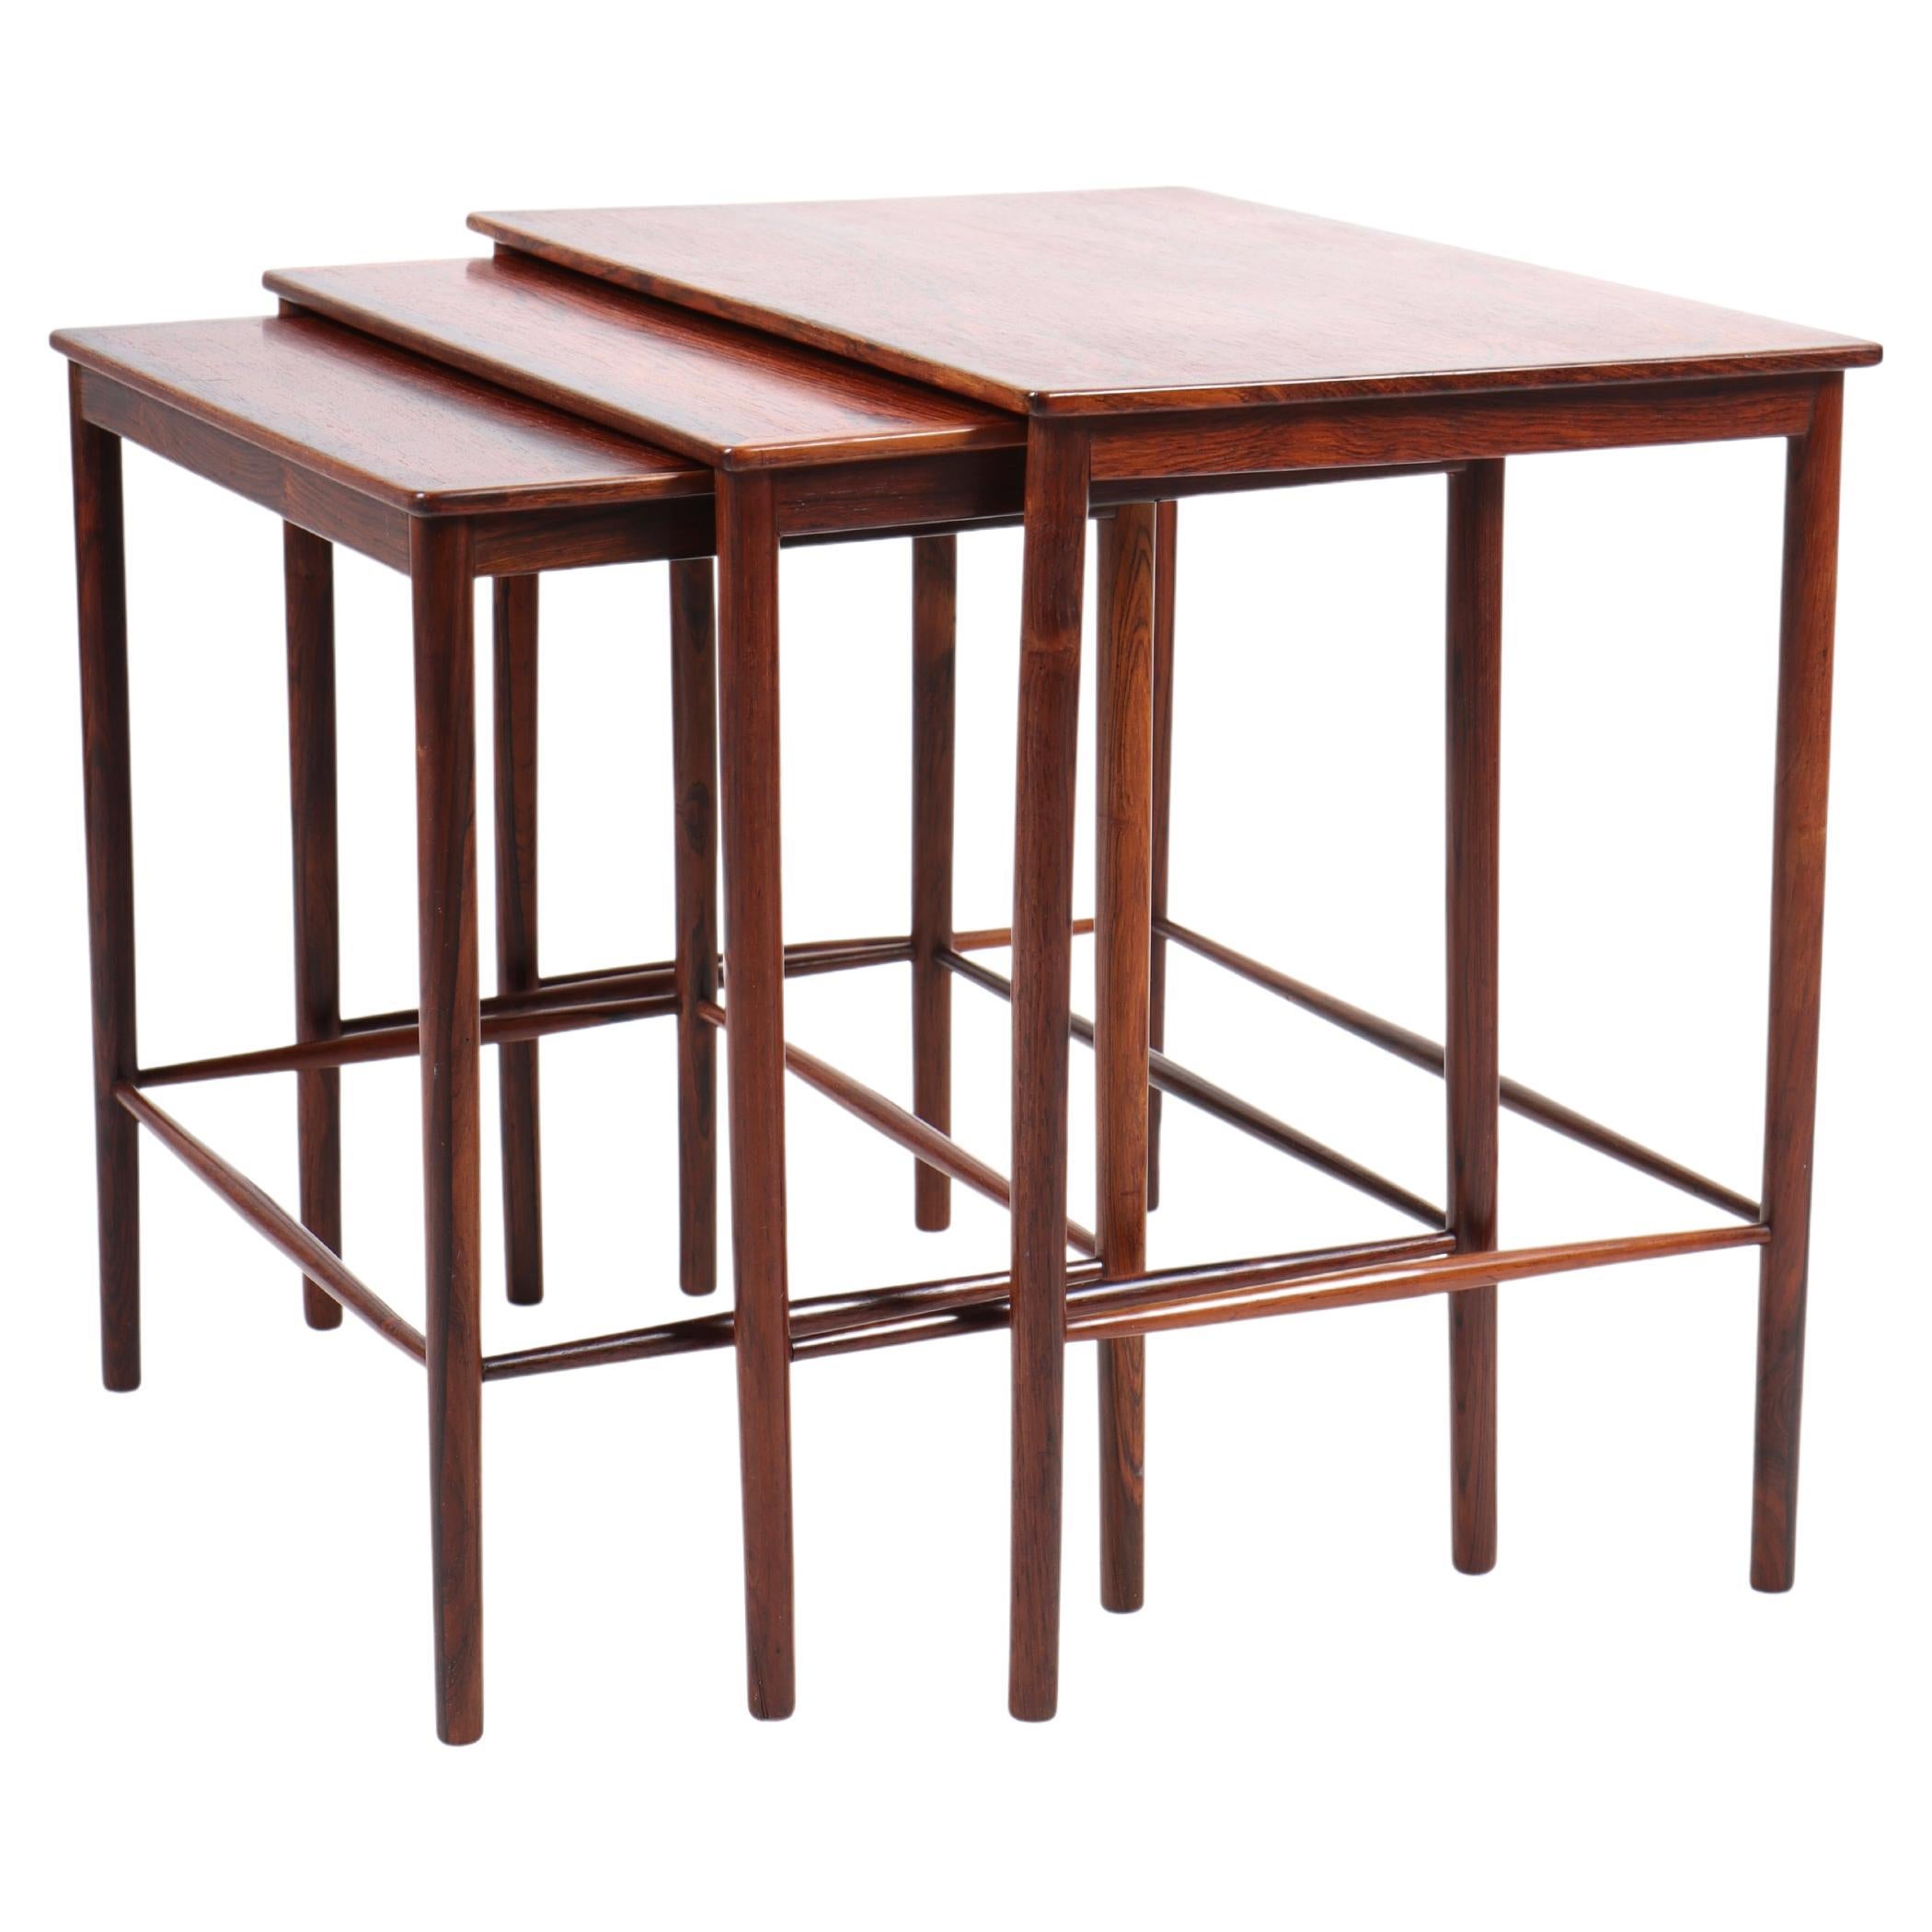 Midcentury Nesting Table in Rosewood Designed by Grethe Jalk, 1950s